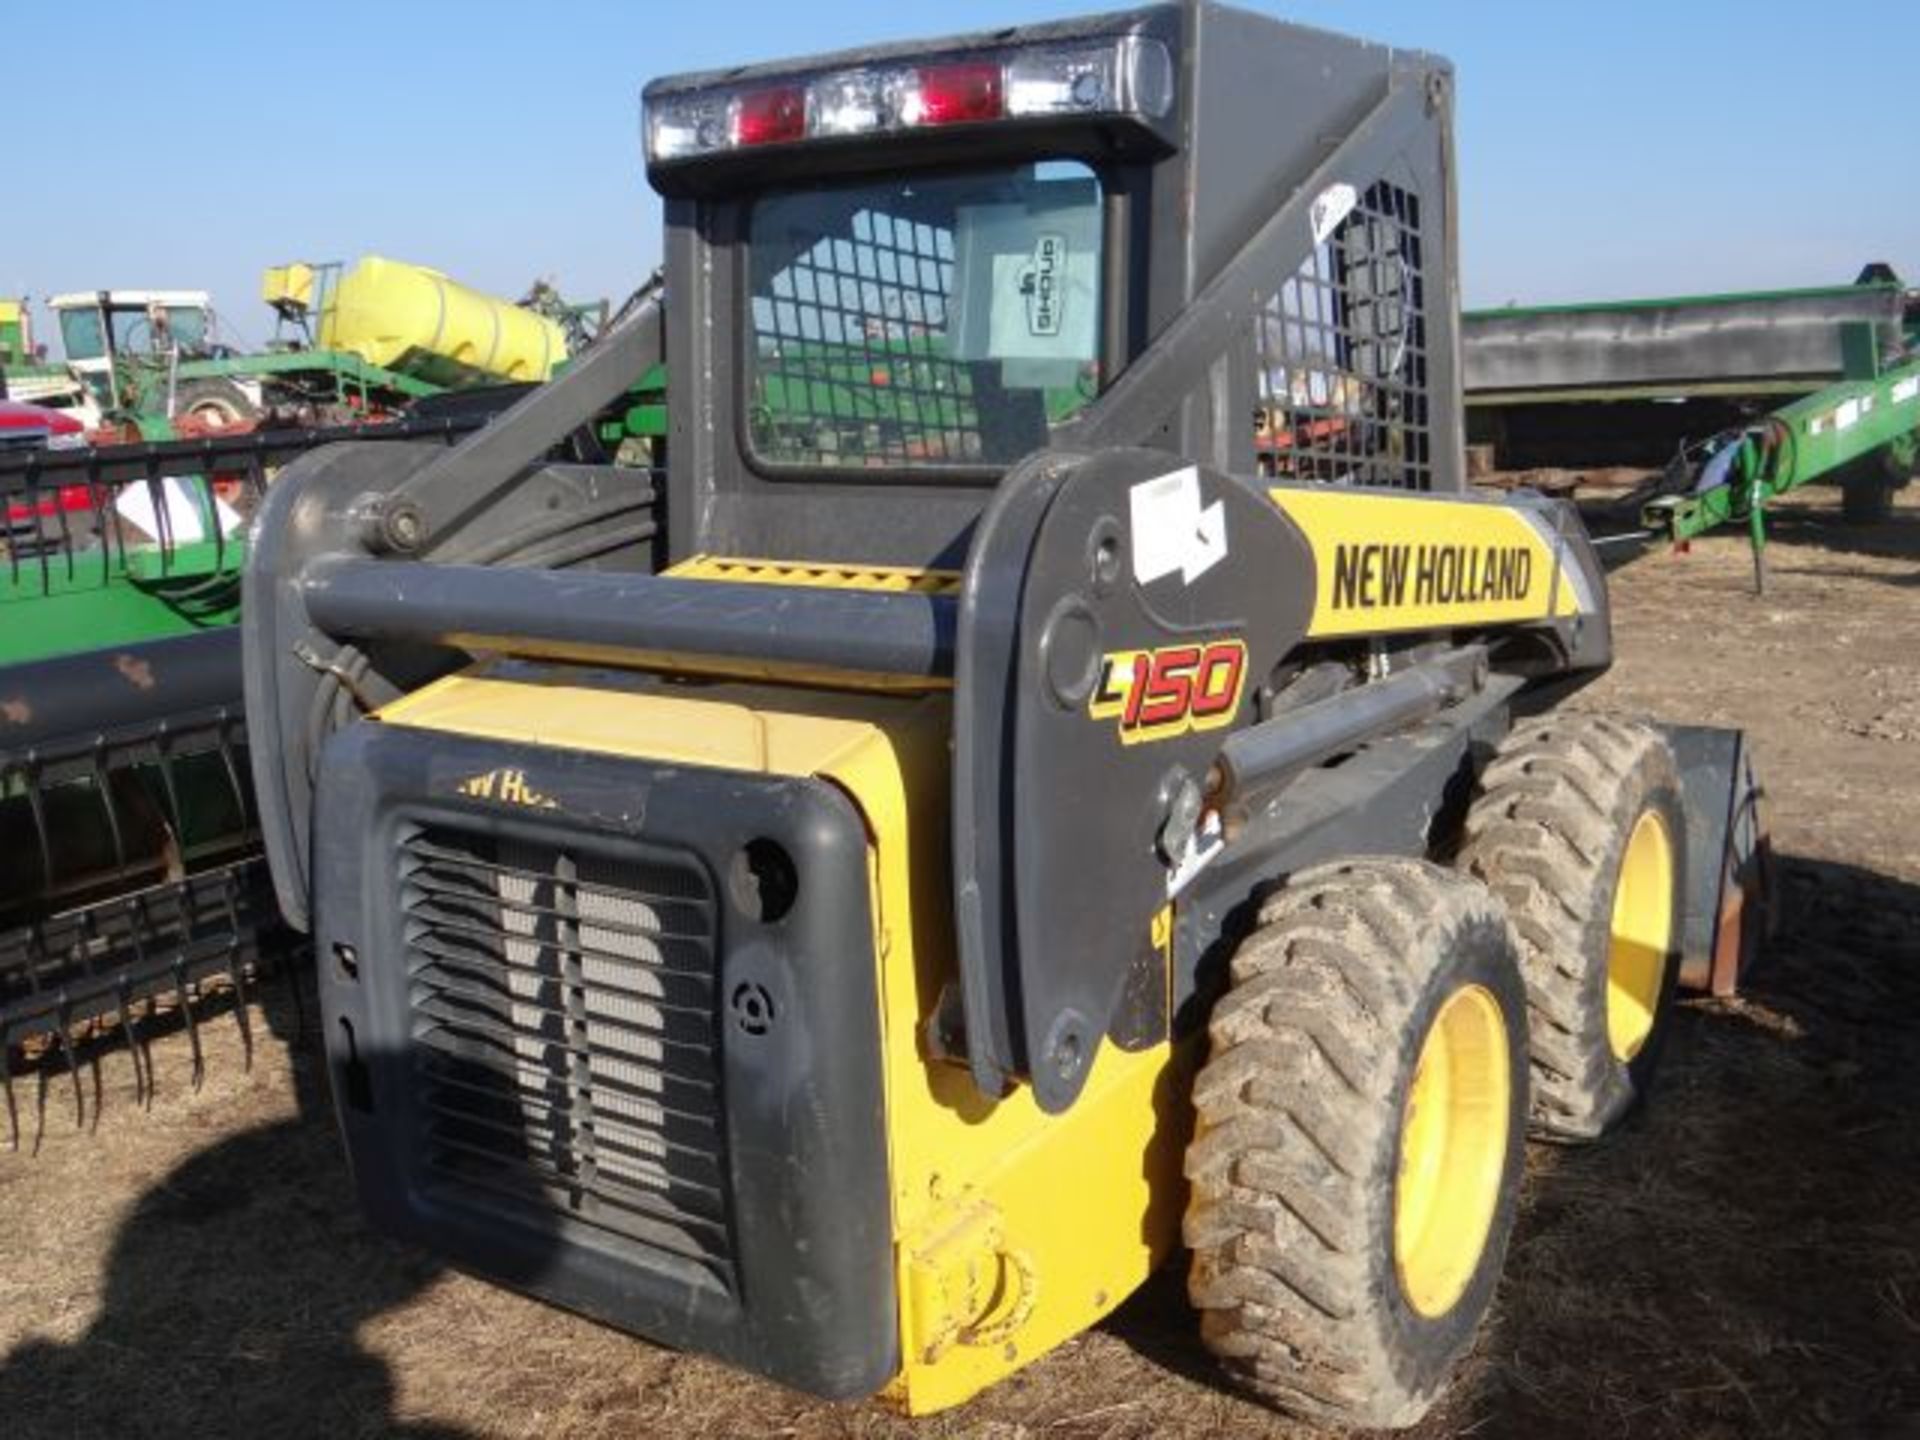 NH L150 Skid Loader, 2008 200 hrs, All New Oil & Filters, Excellent Condition, Aux Hyd, Good Tires